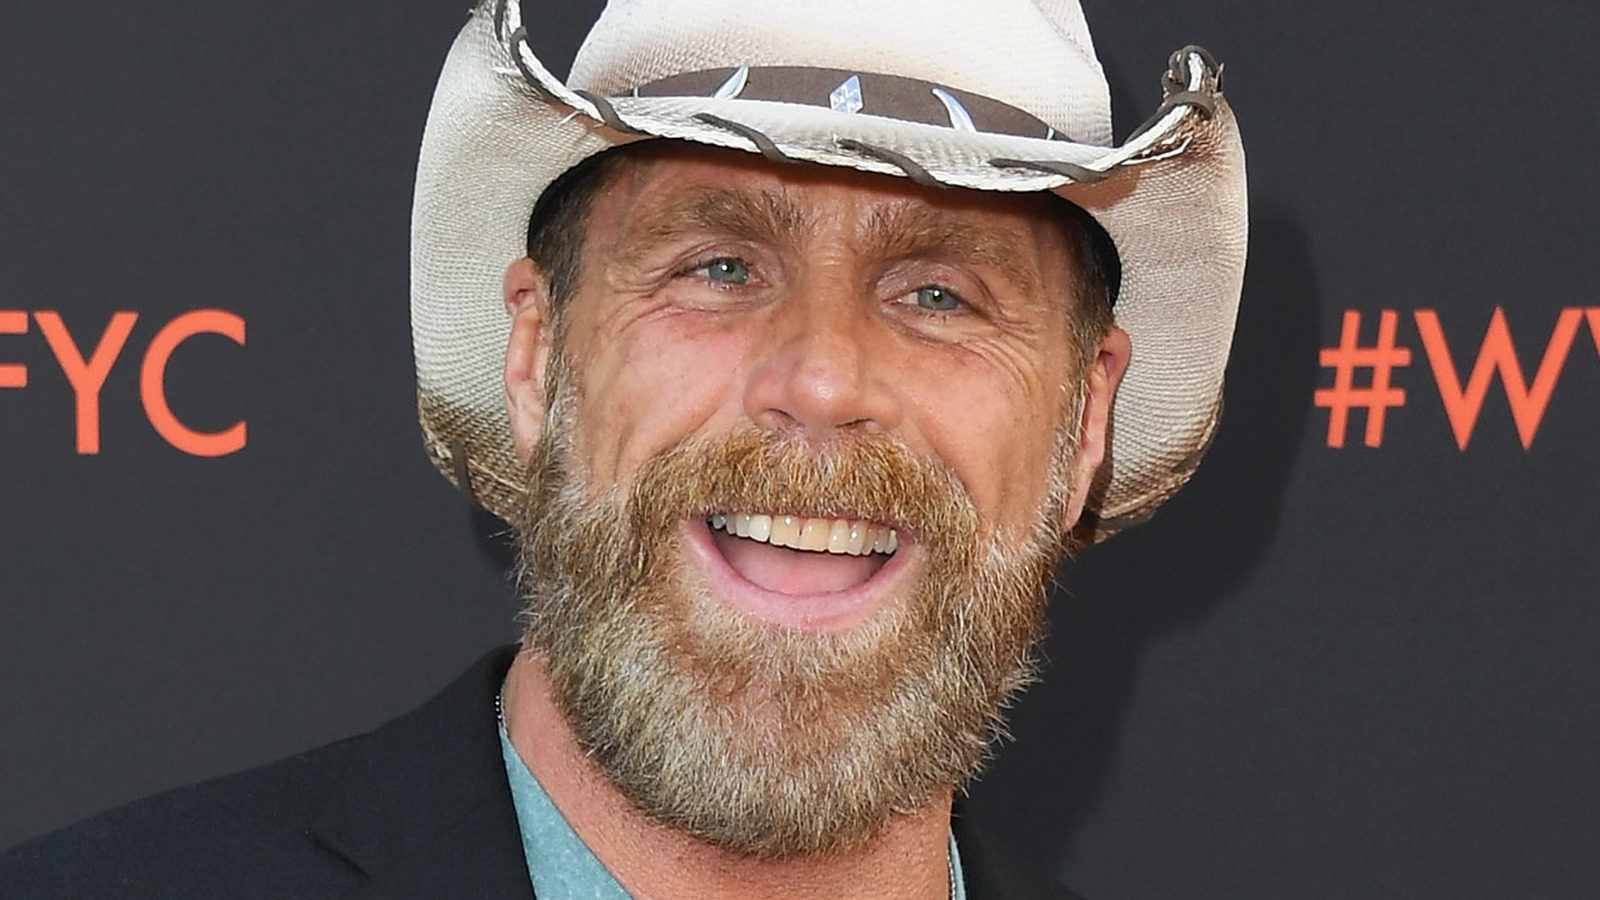 Shawn Michaels Feels More Comfortable With One Aspect Of WWE These Days